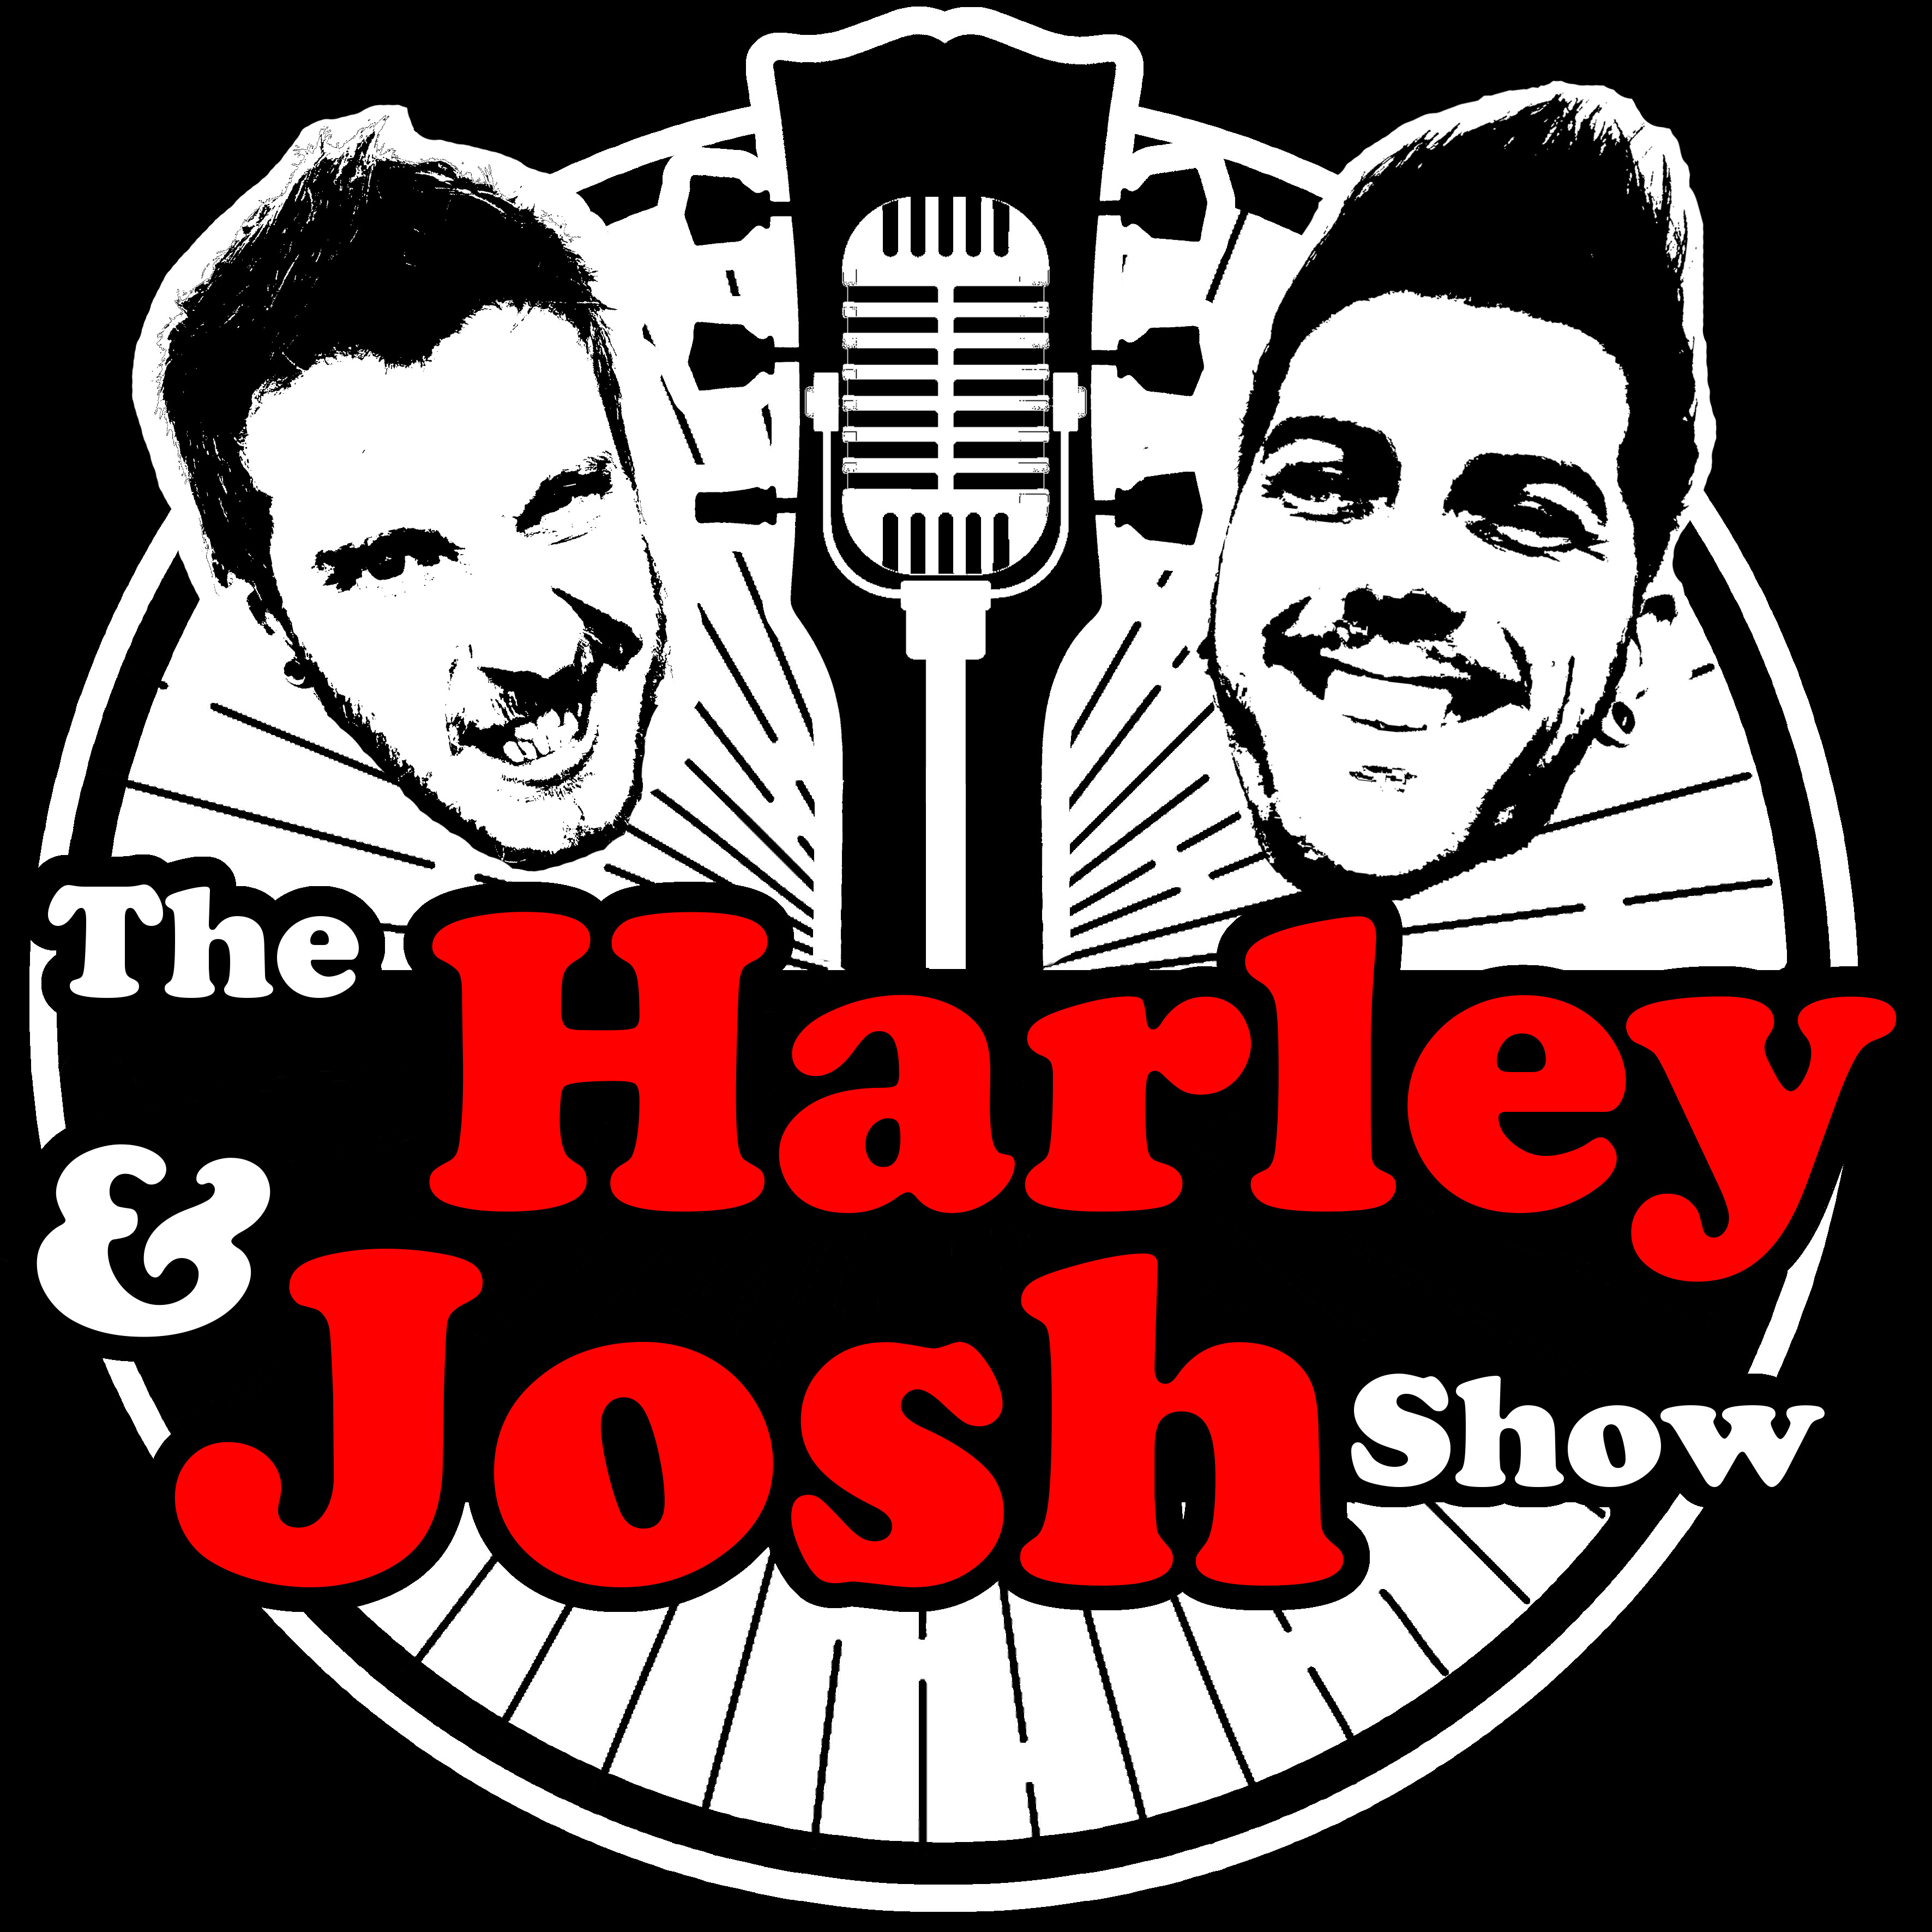 The Harley And Josh Show